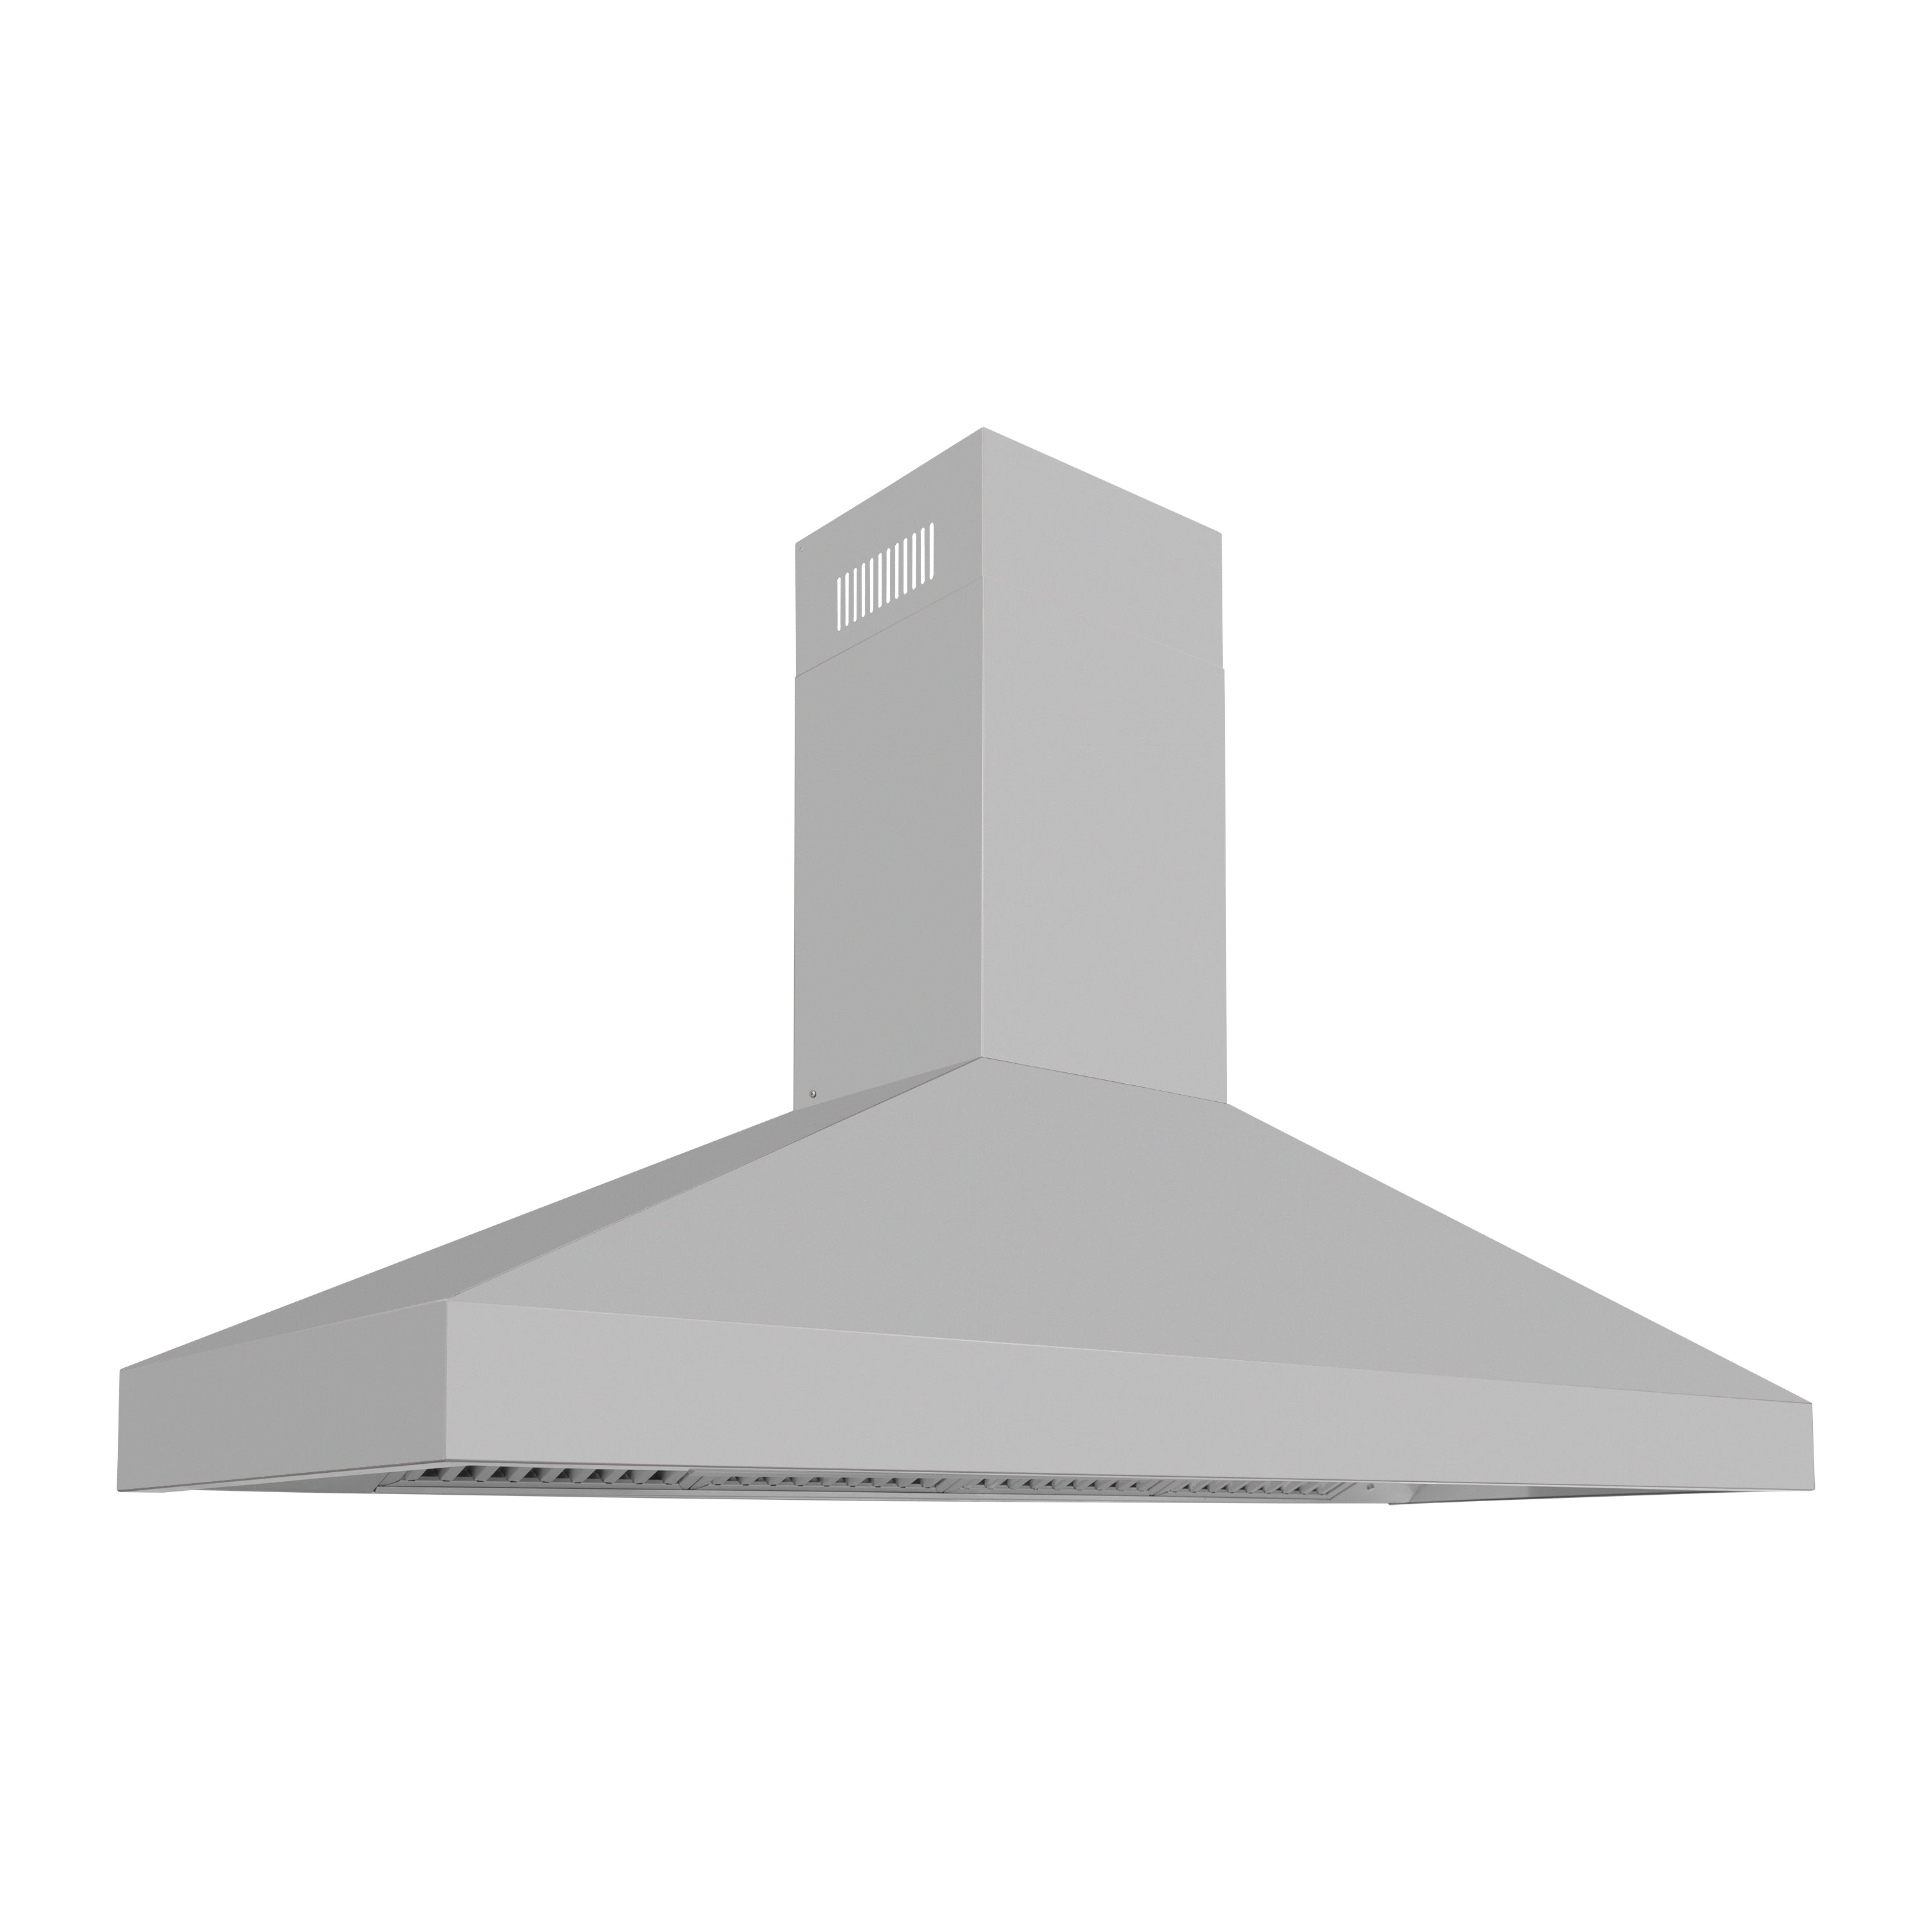 ZLINE 60" Kitchen Package with Stainless Steel Dual Fuel Range and Convertible Vent Range Hood (2KP-RARH60)